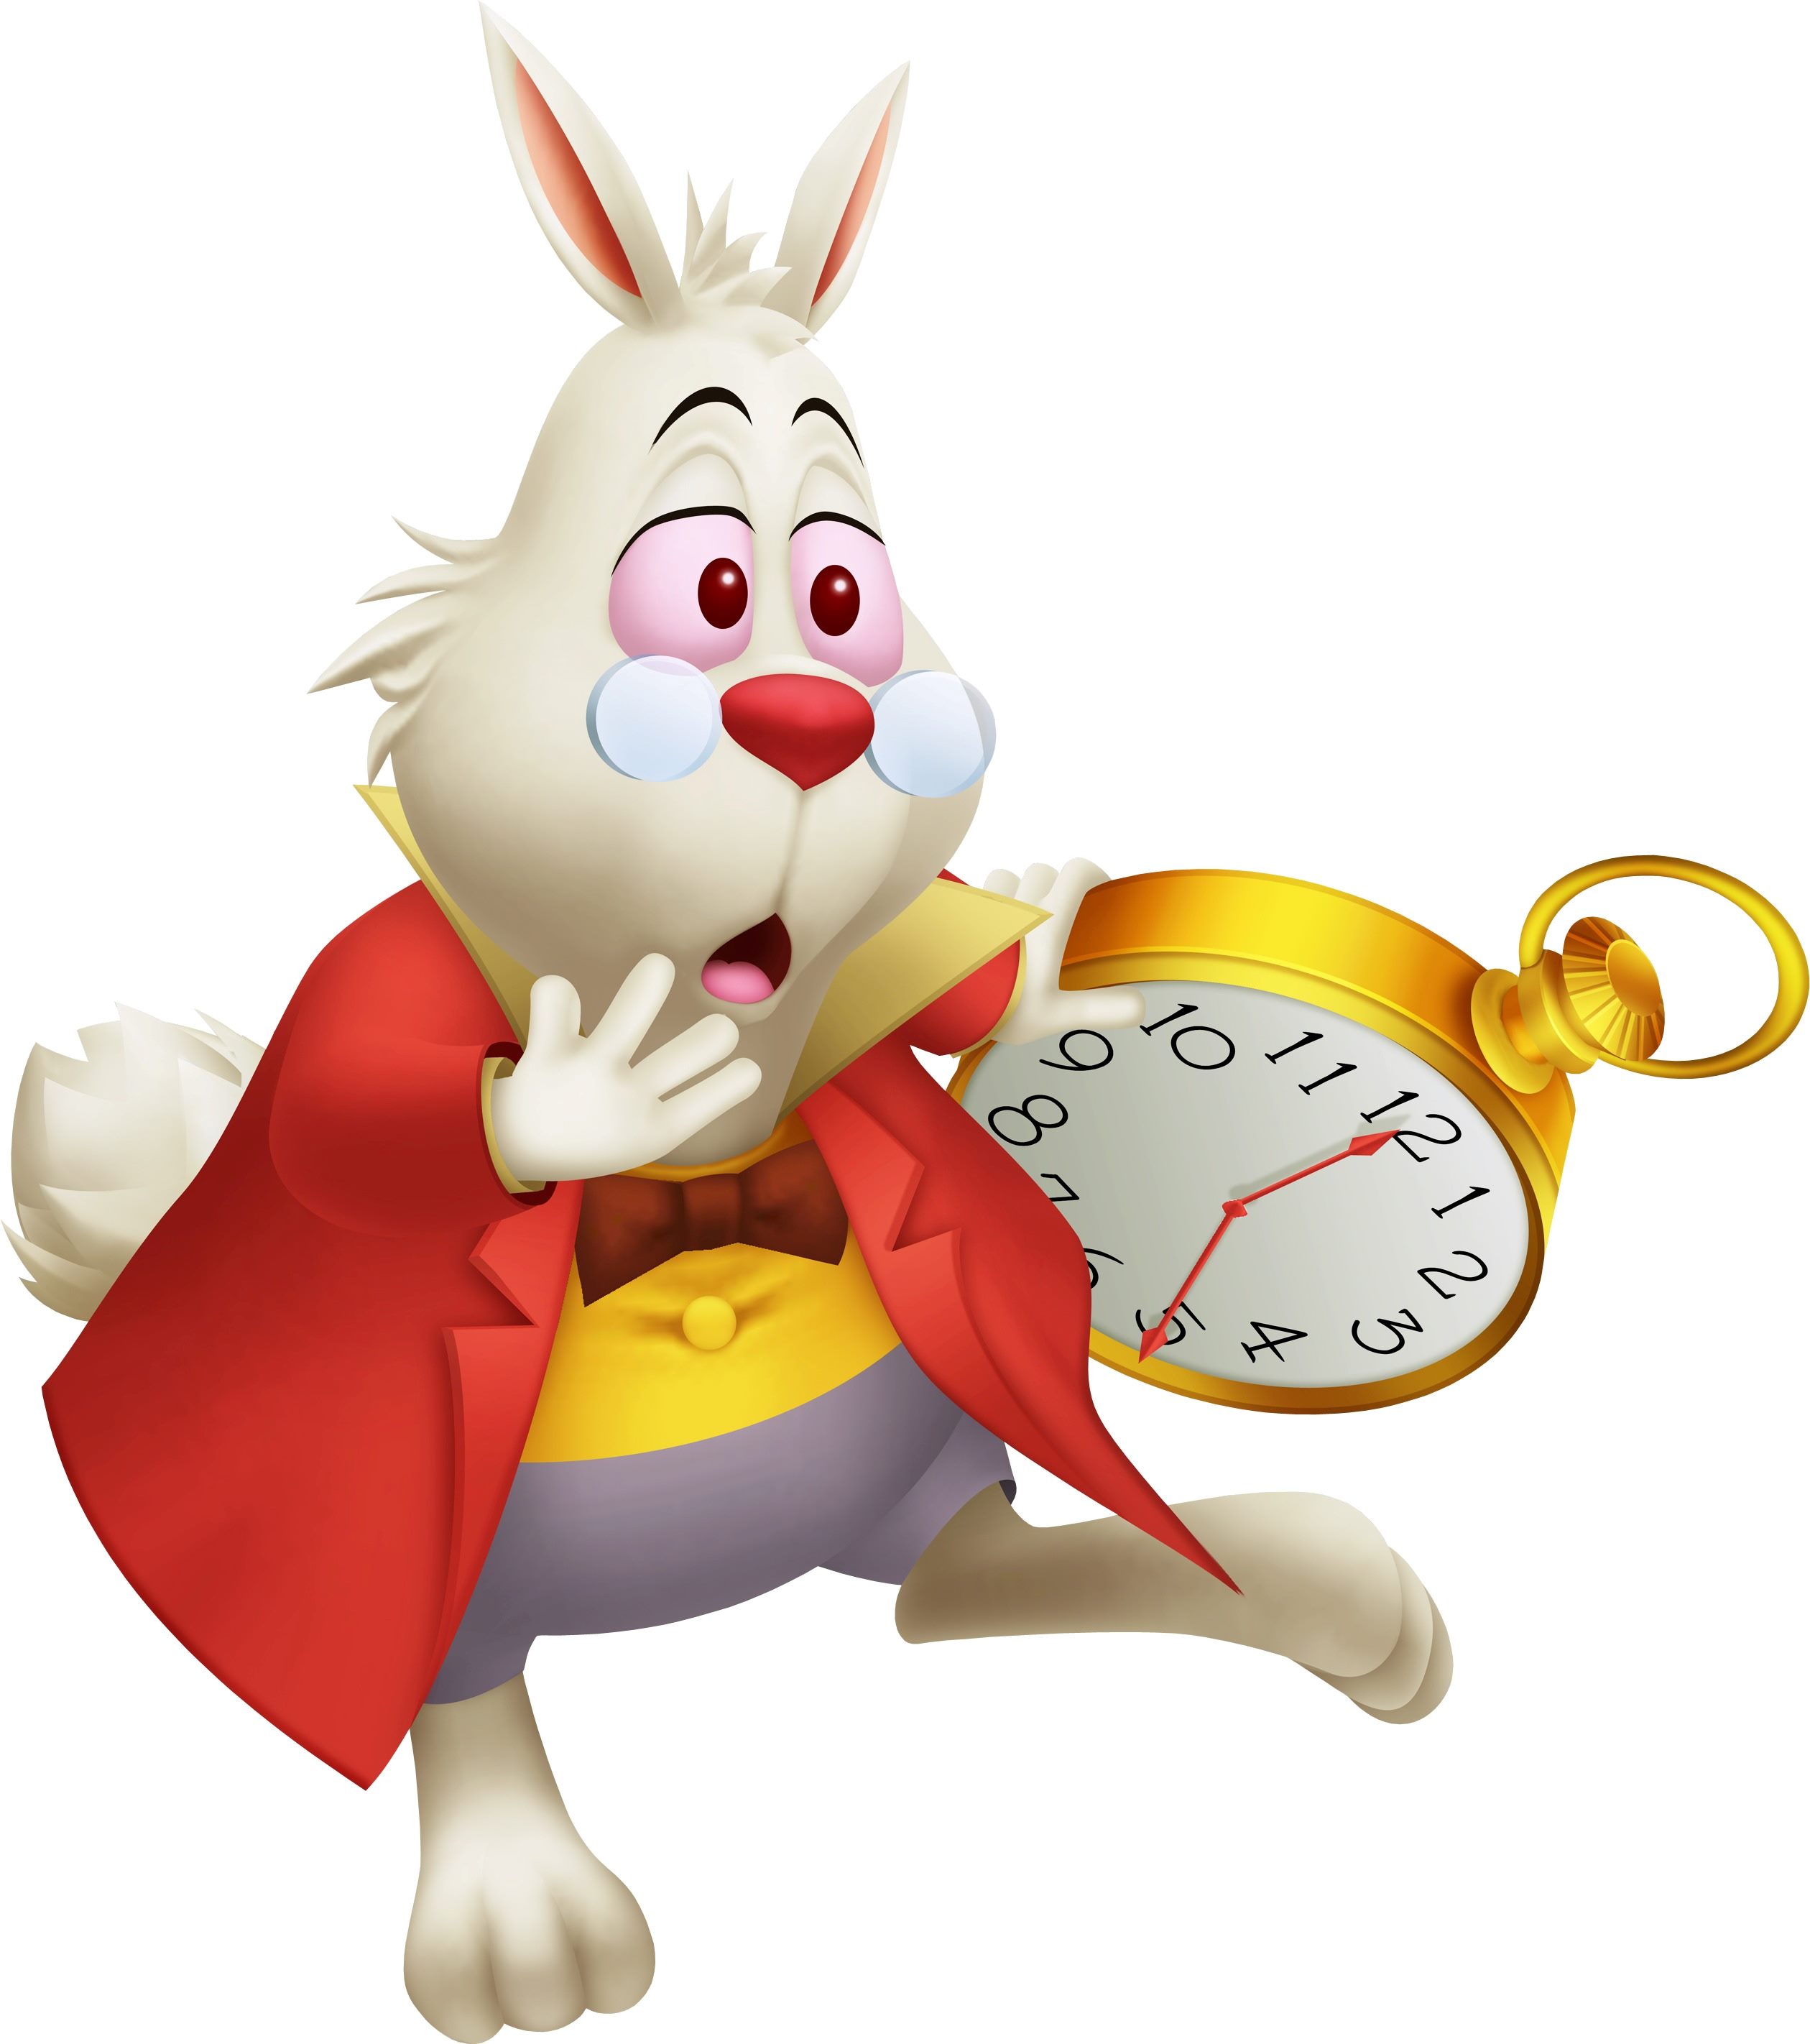 https://facts.net/wp-content/uploads/2023/09/20-facts-about-white-rabbit-alice-in-wonderland-1694739481.jpg